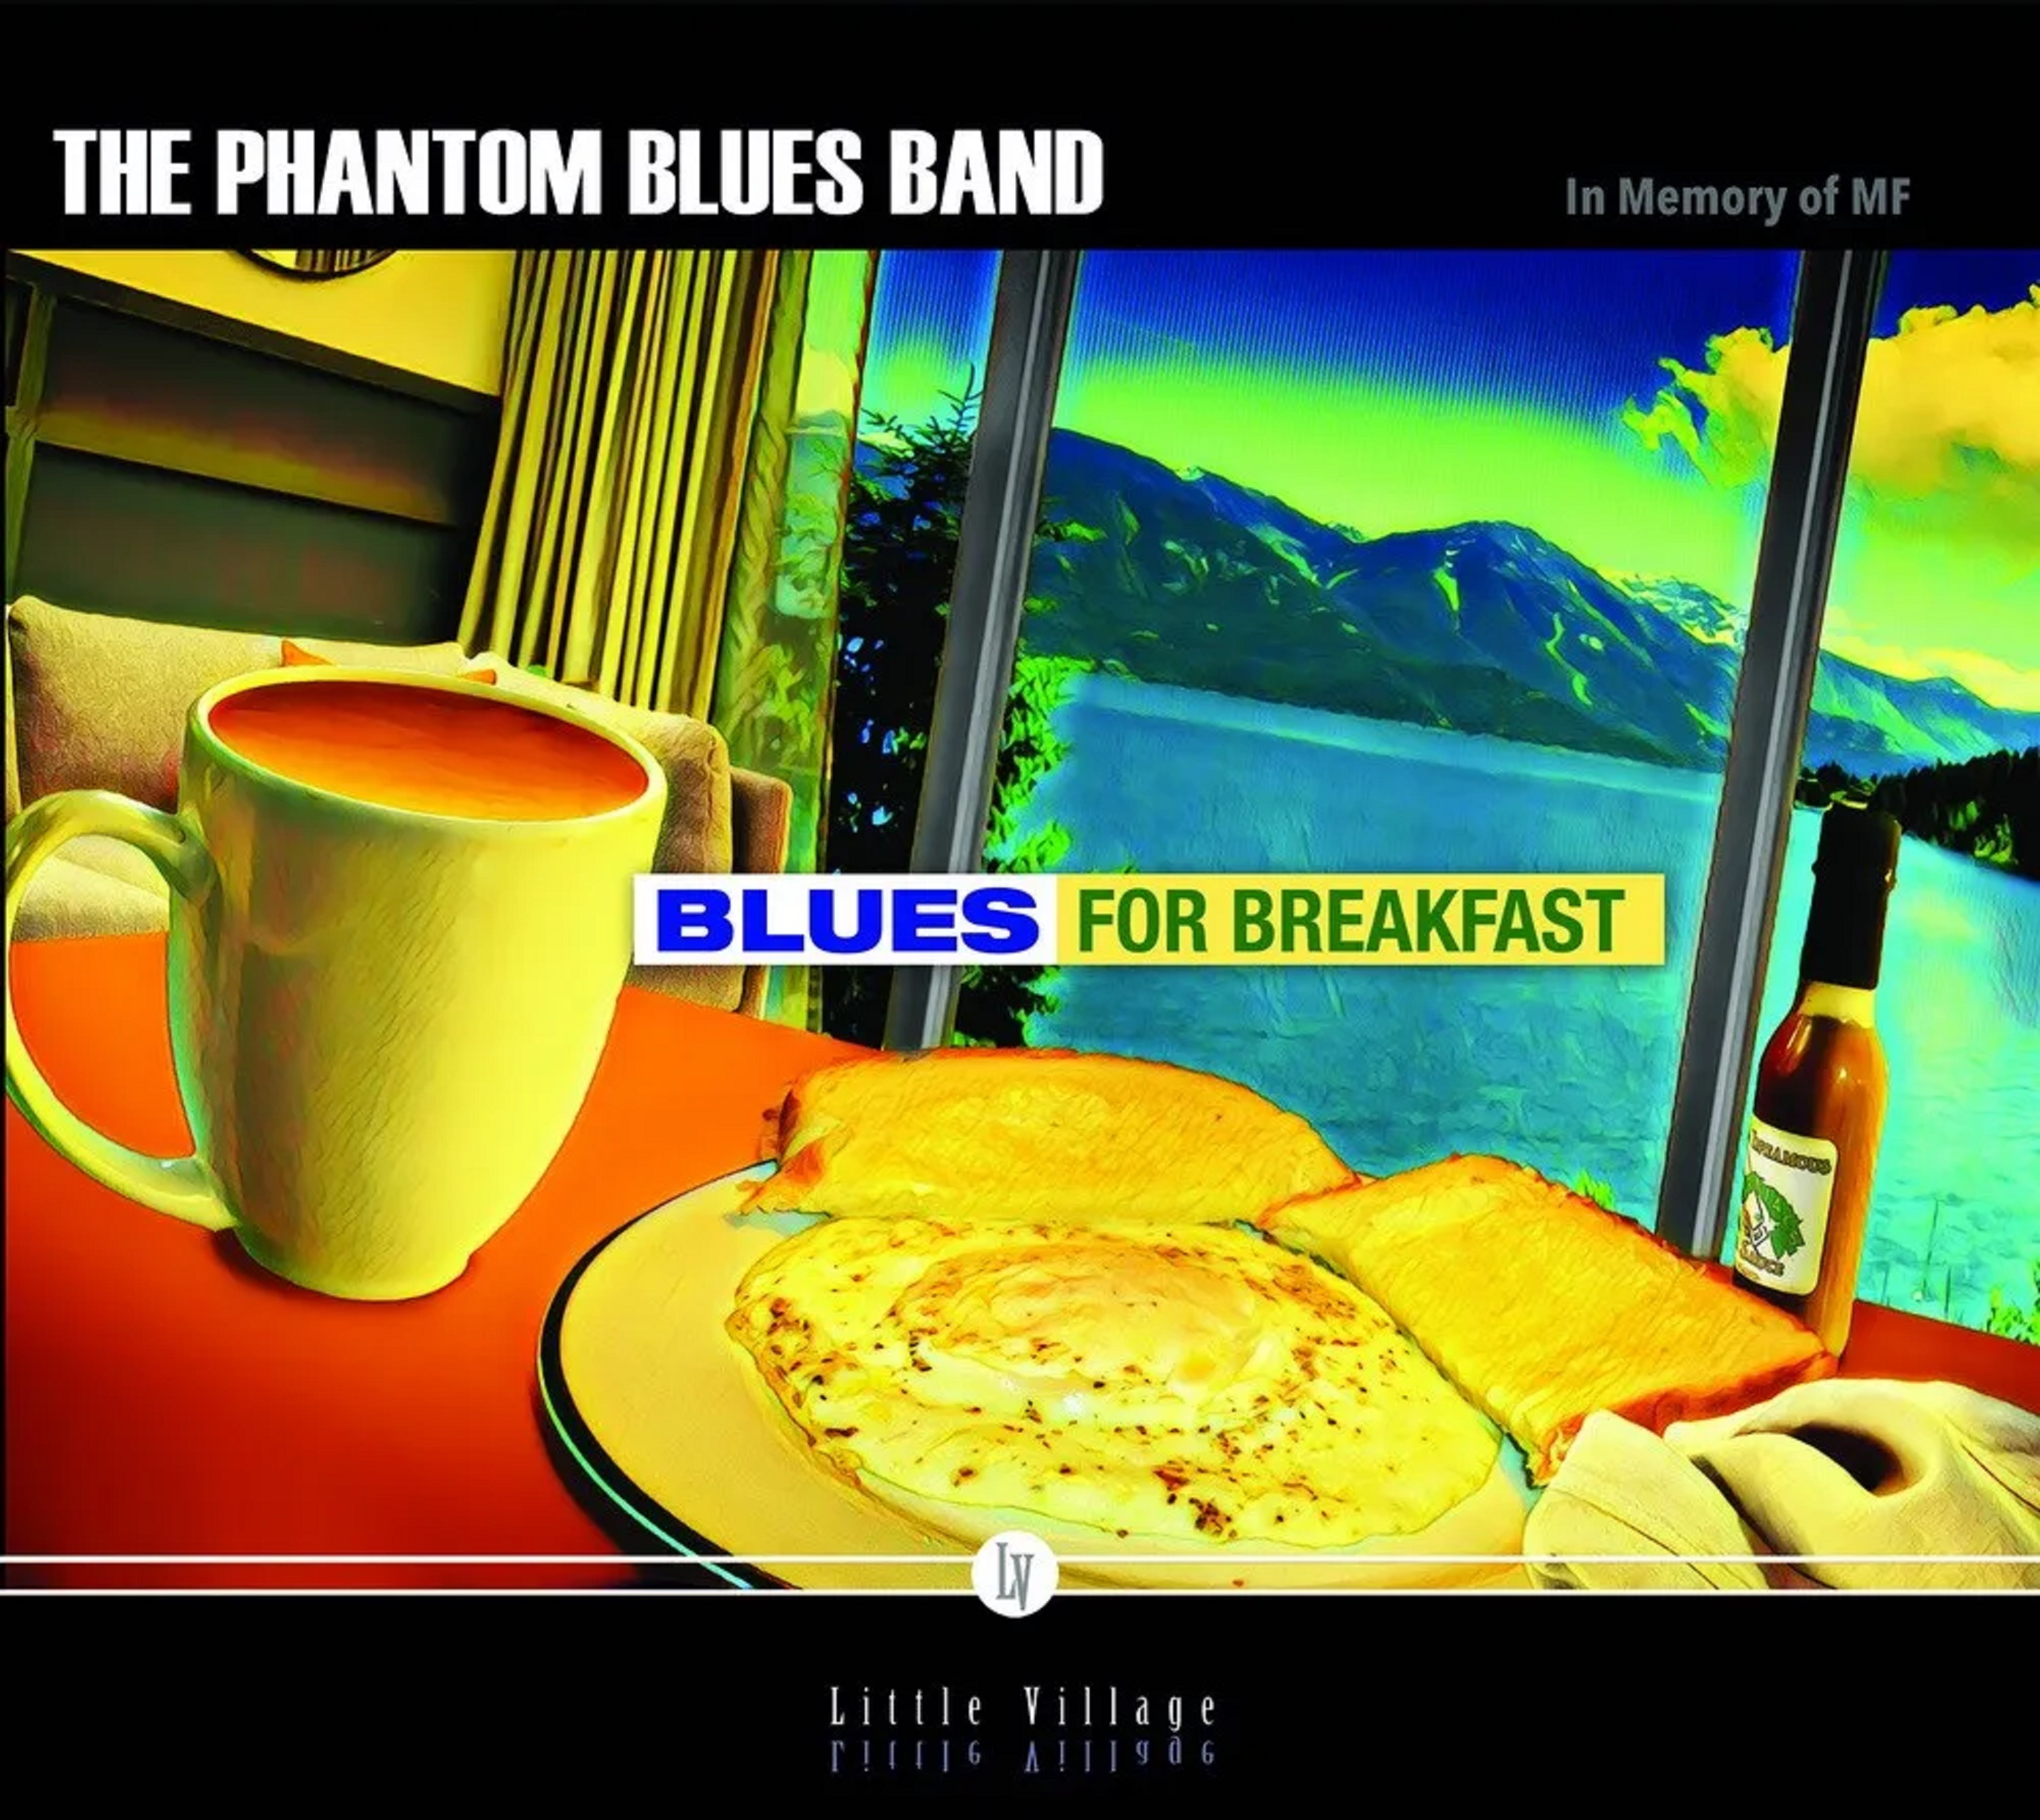 Phantom Blues Band's "Blues for Breakfast" Available June 18th, 2022